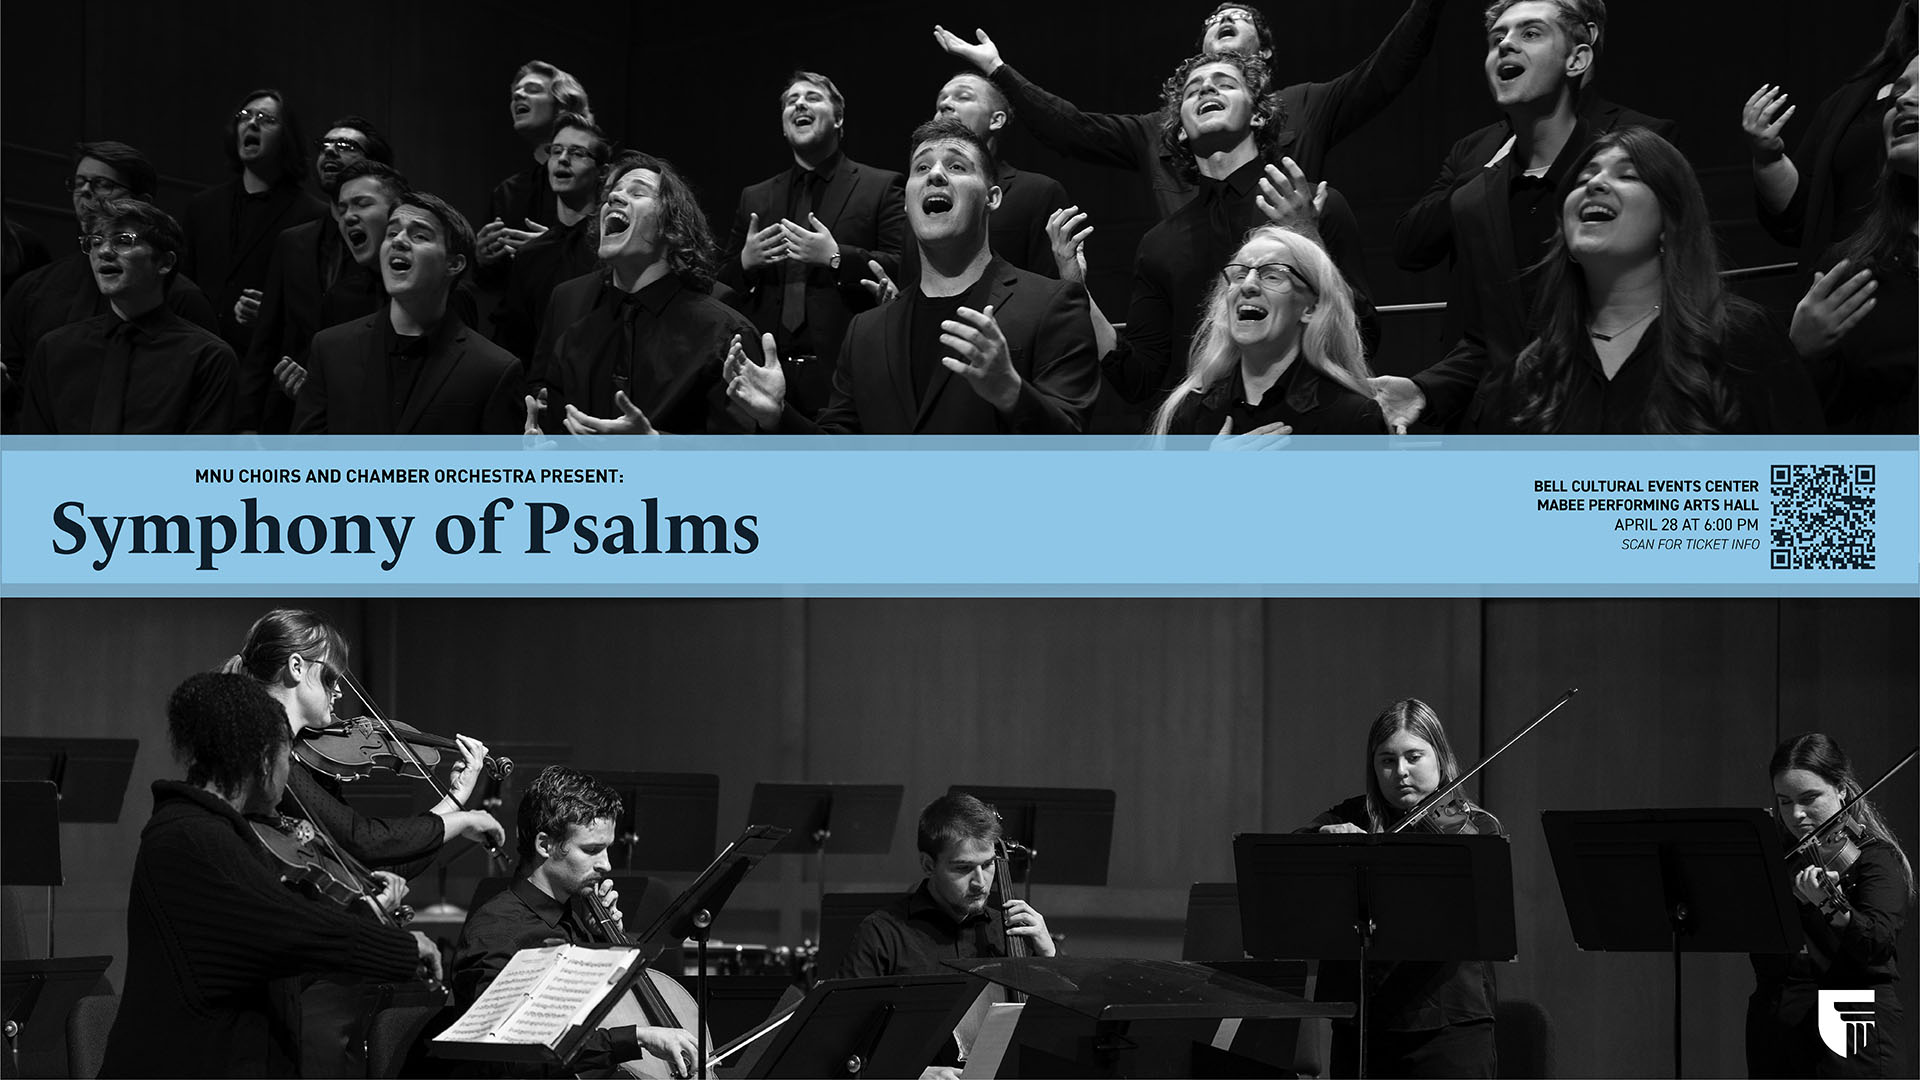 Symphony of Psalms - Choir and orchestra concert